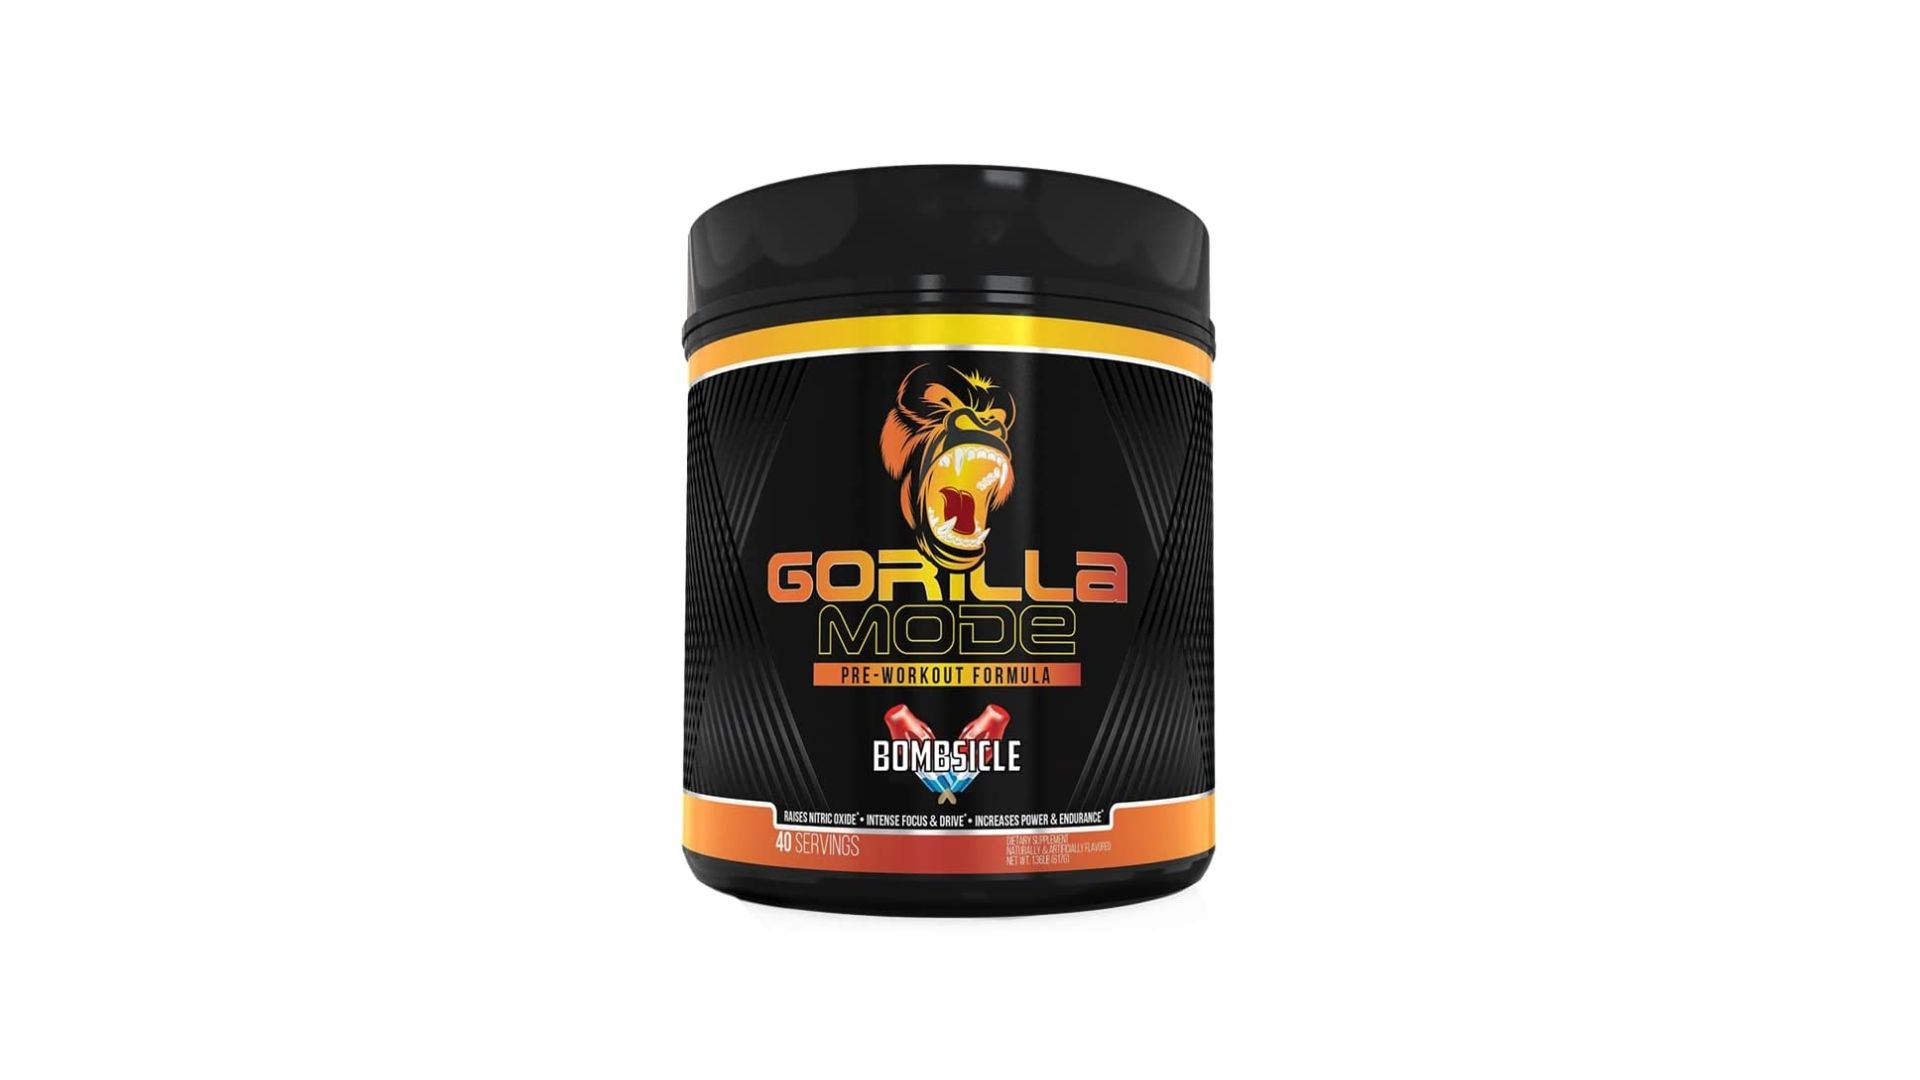 Gorilla Mode Pre Workout Review – What Do Real Users Say?